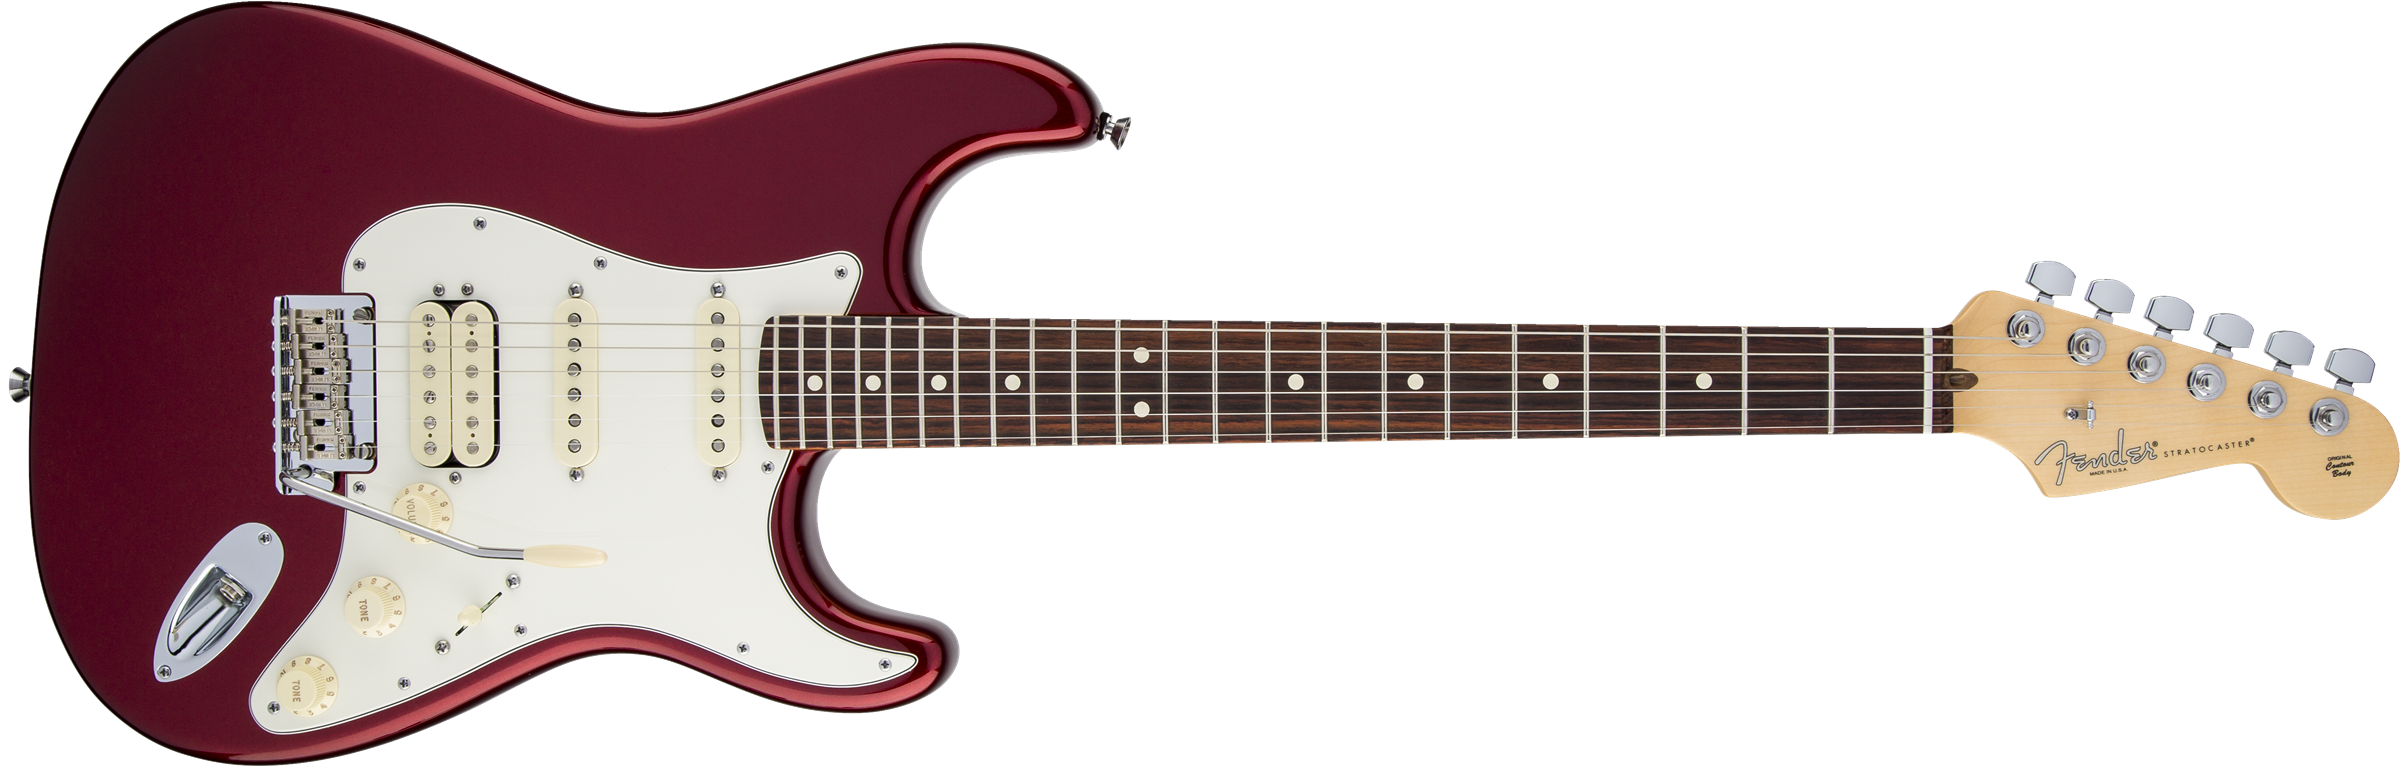 American Standard Stratocaster® HSS, Rosewood Fingerboard, Mystic Red